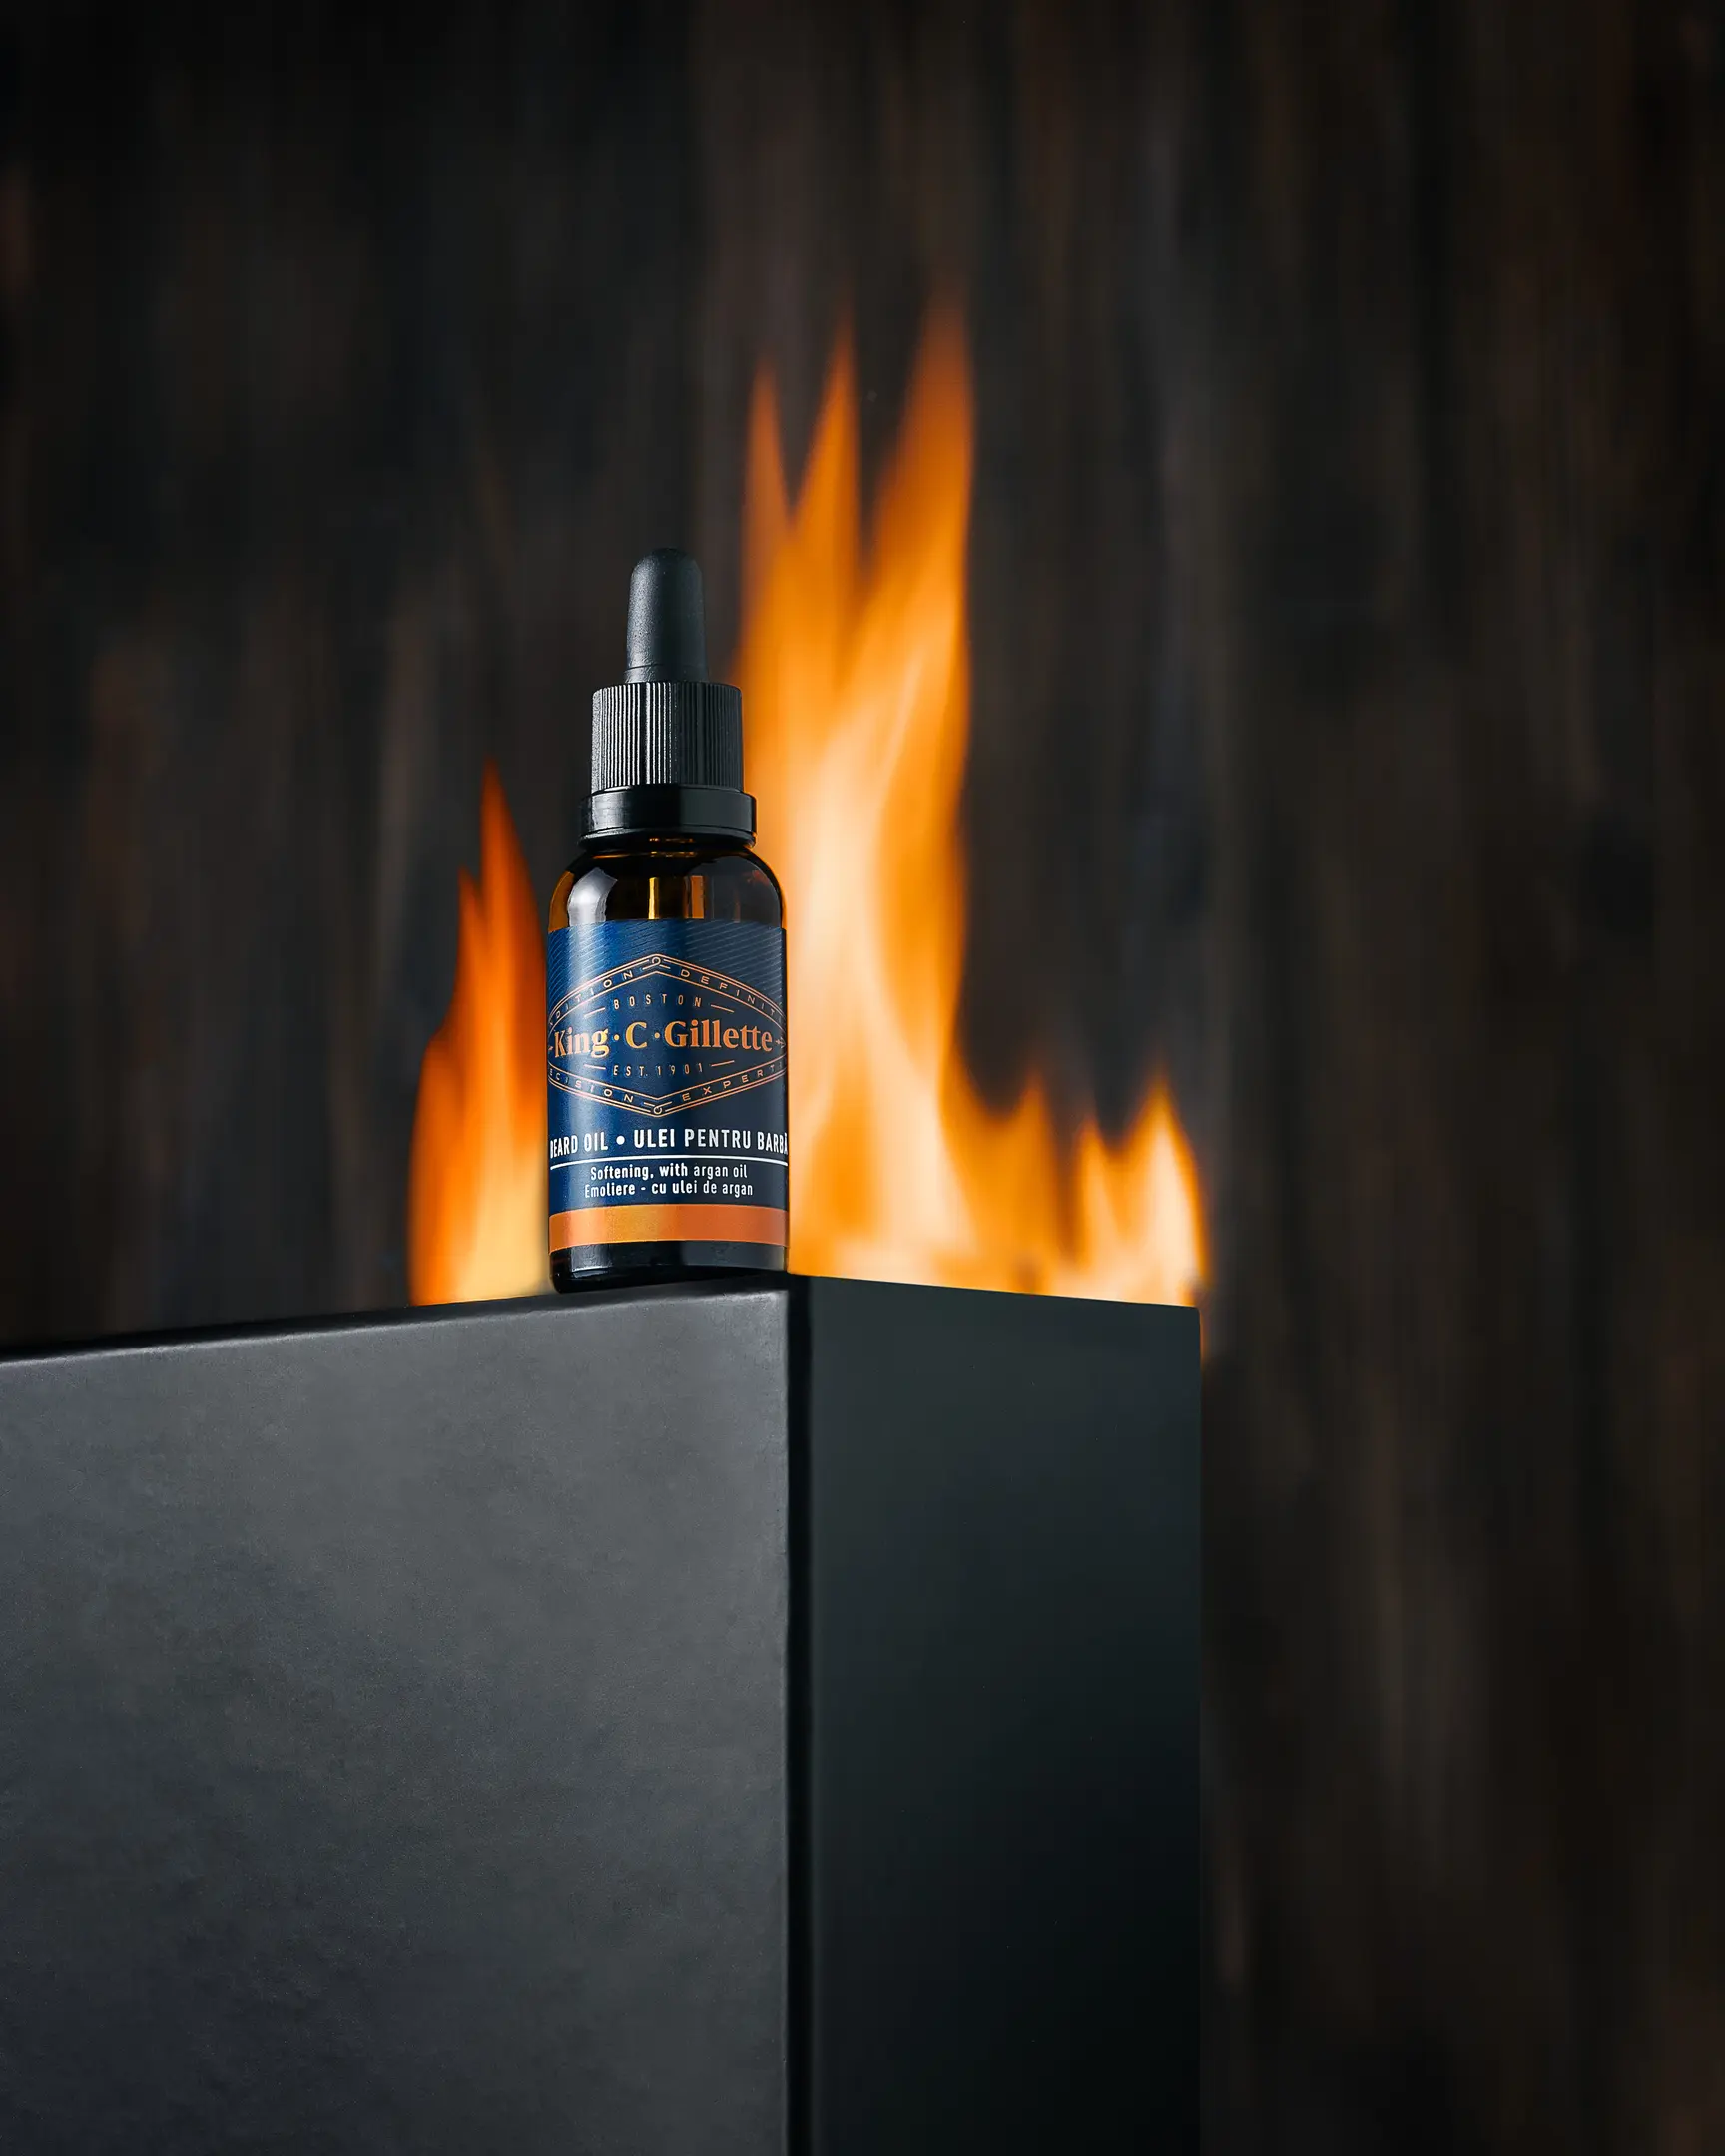 Result photo for King C Gillette with fire. Pictured is King C Gillette beard oil. It stands on a black rectangular base. Behind him, a fire is burning and a wooden background is also visible.